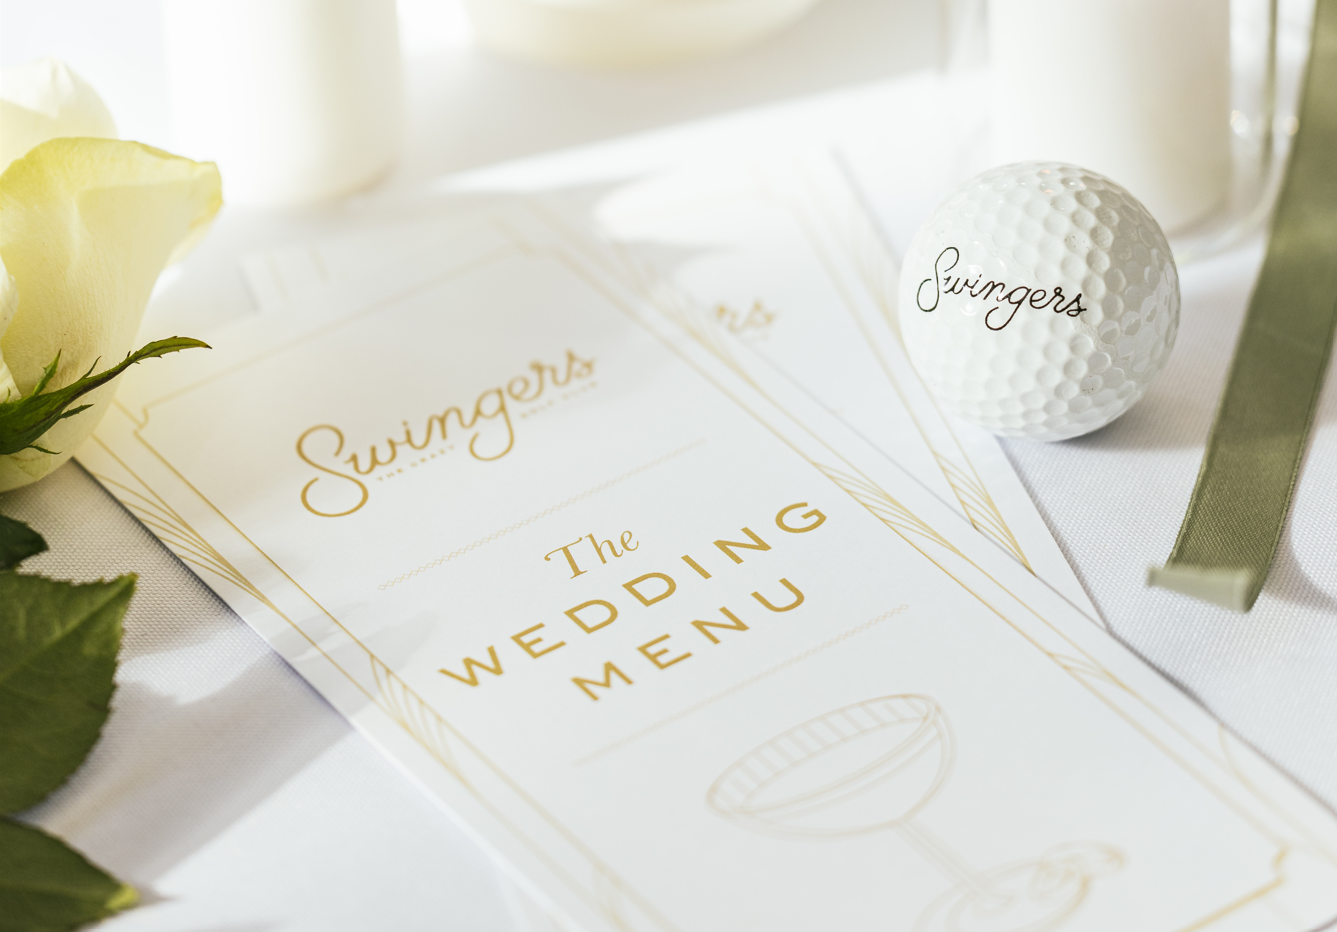 A Swingers wedding menu with white stationery and gold lettering.